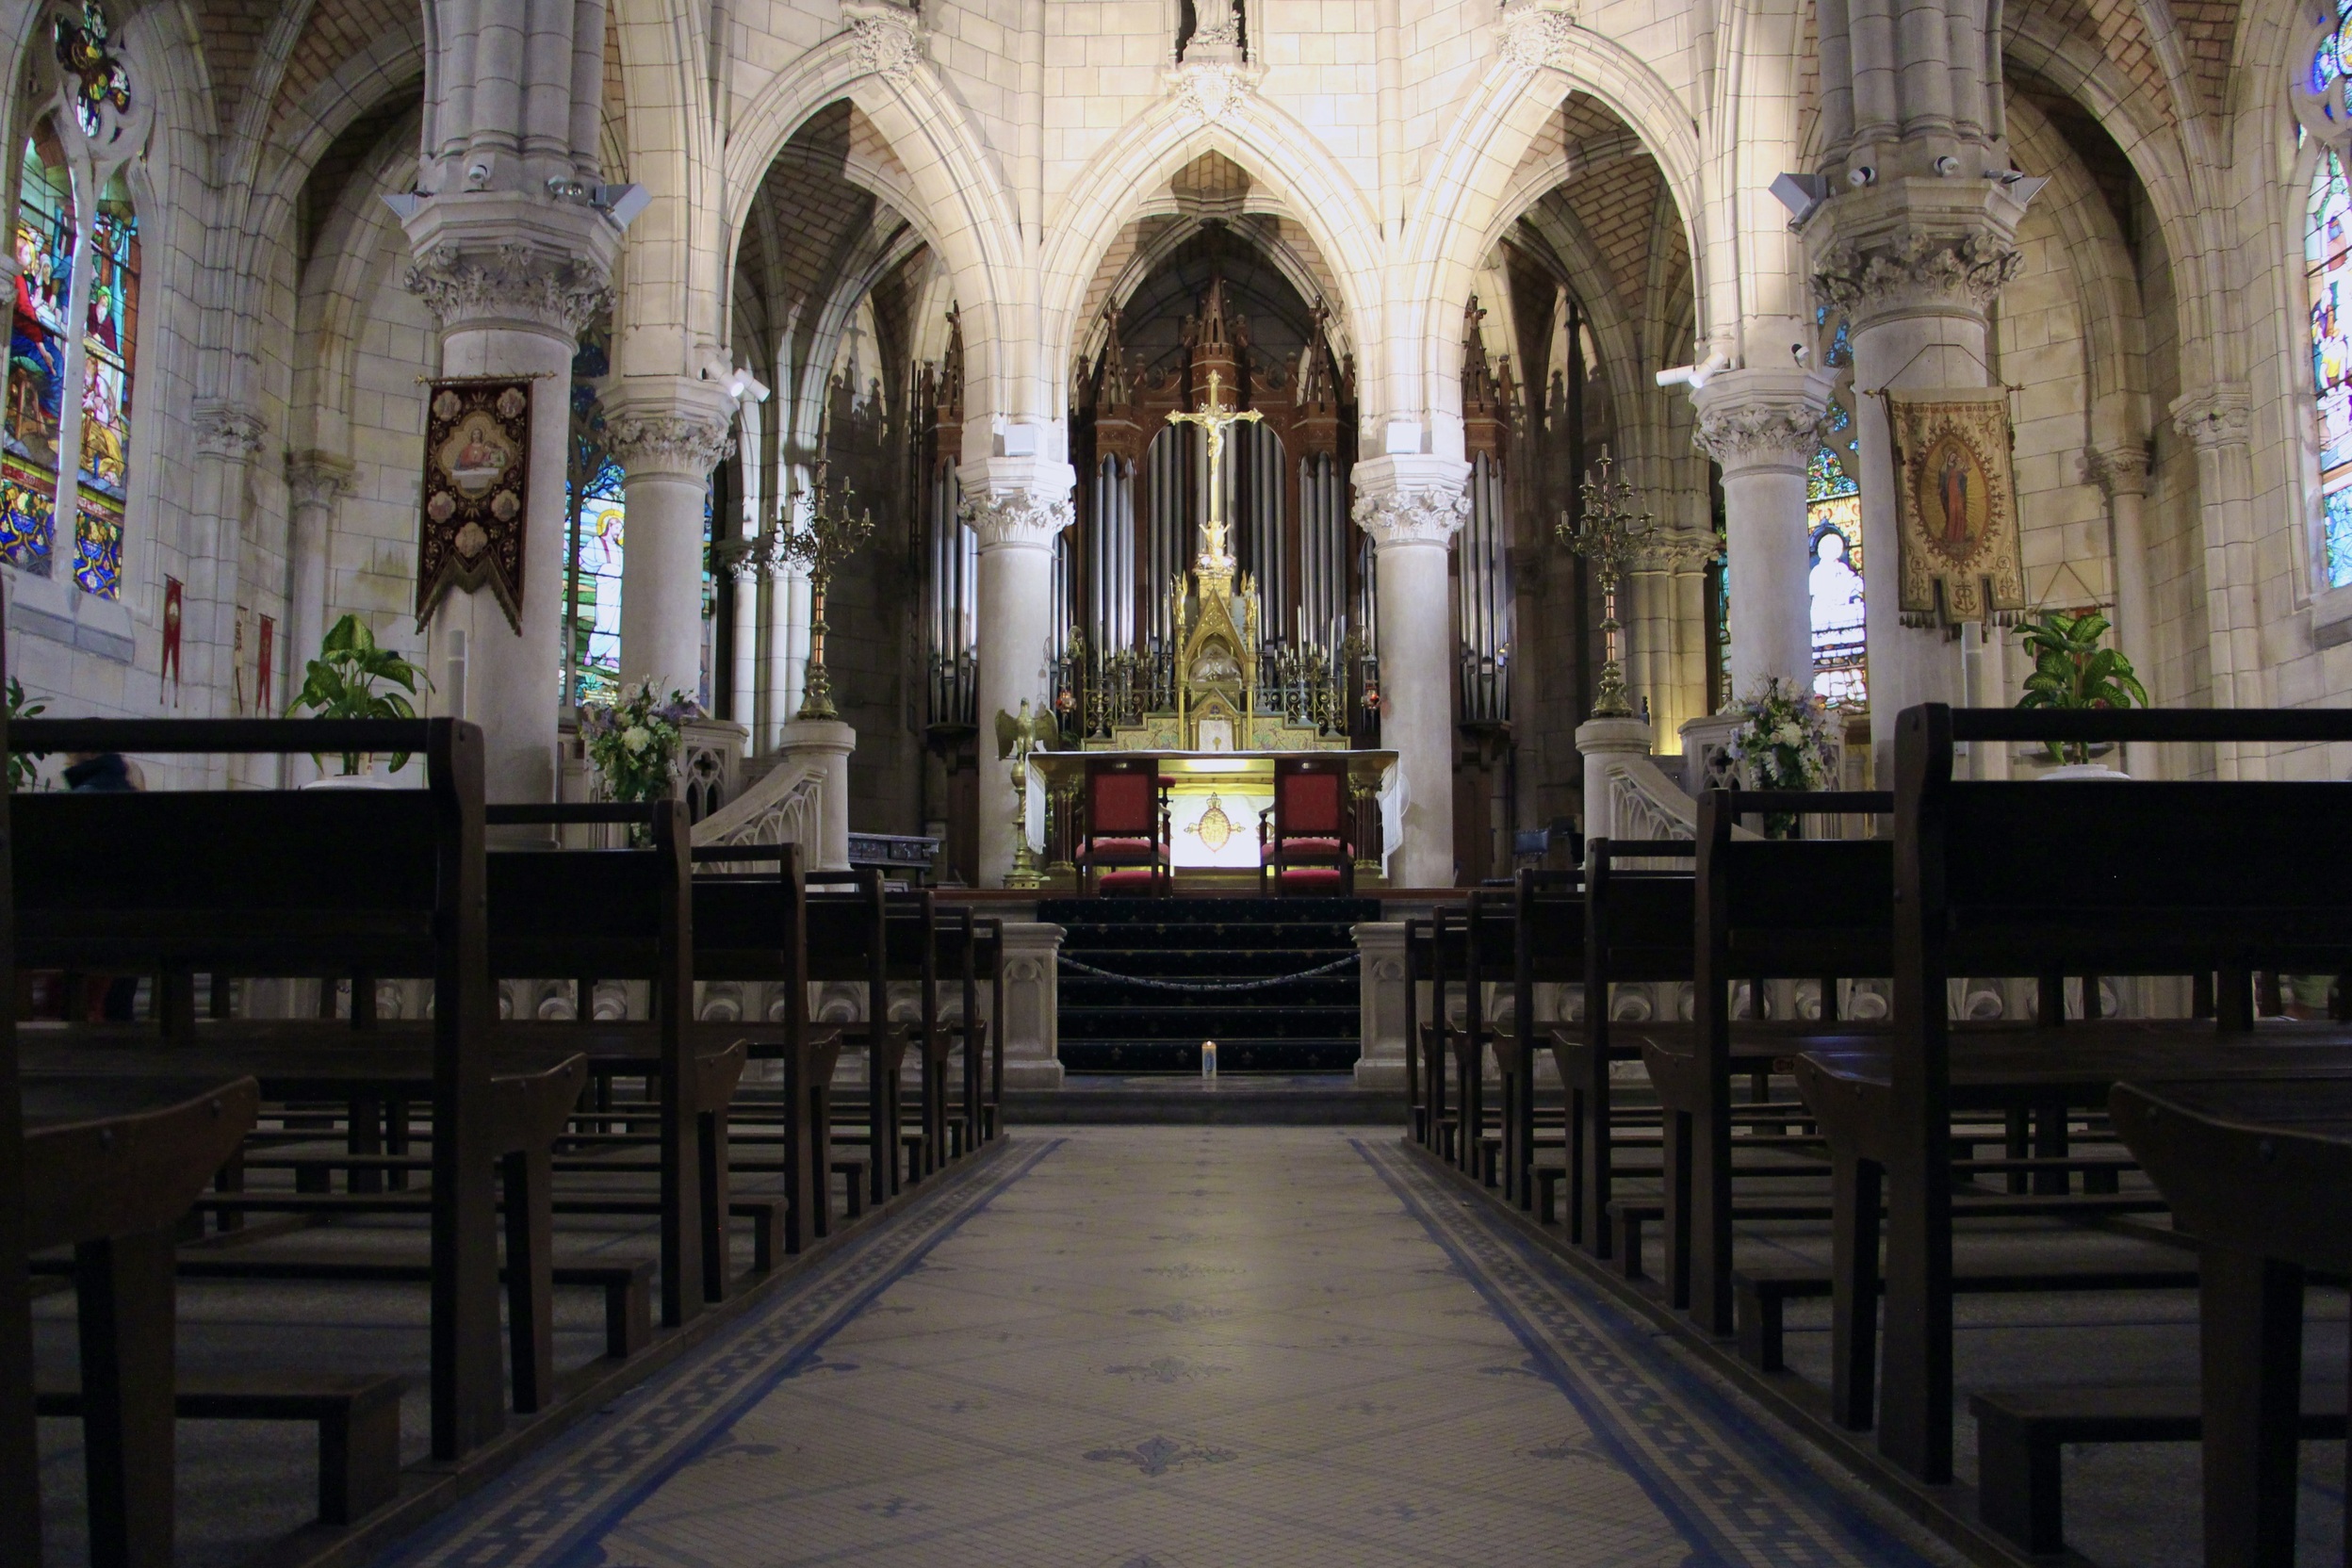 The inside of the Église Sainte-Eugénie in Biarritz, France.